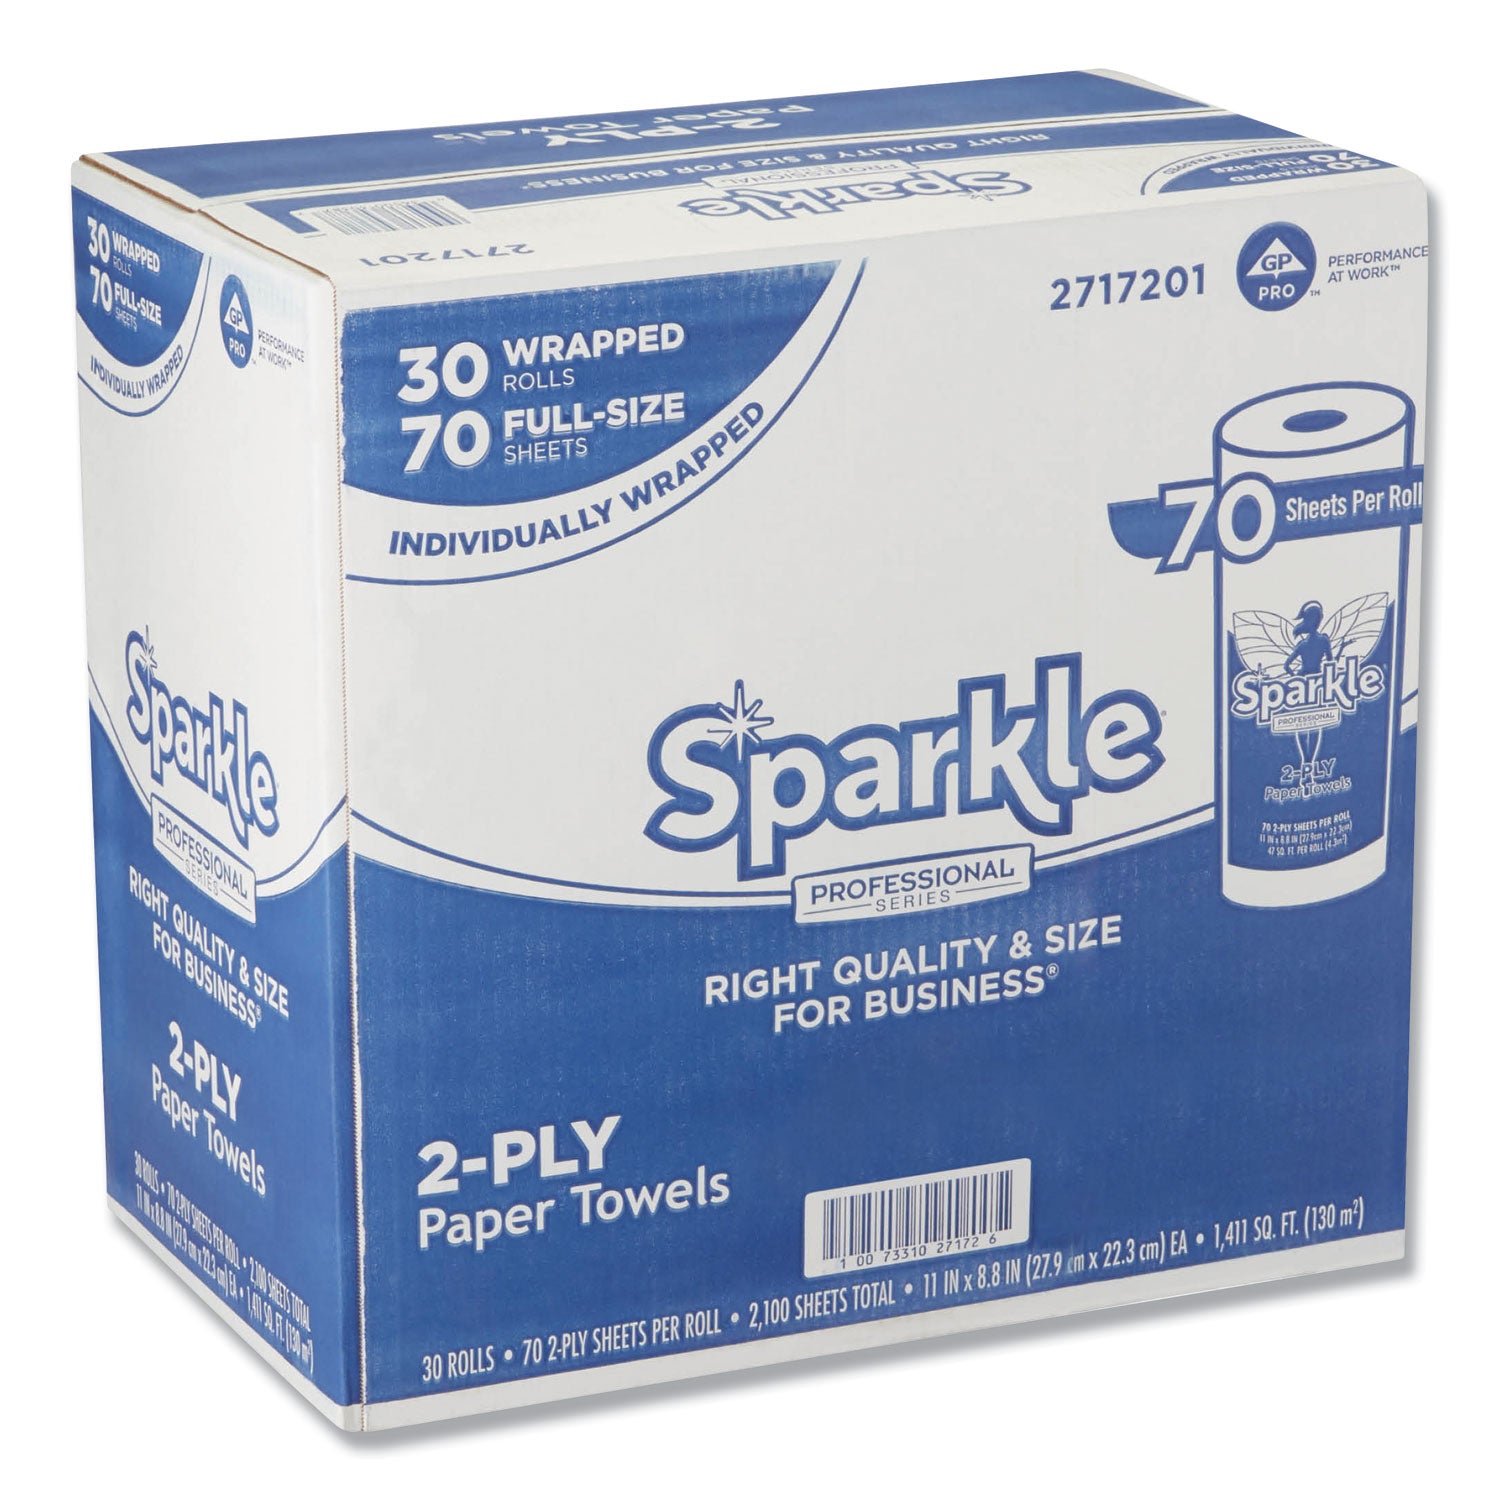 Sparkle ps Premium Perforated Paper Kitchen Towel Roll, 2-Ply, 11 x 8.8, White, 70 Sheets, 30 Rolls/Carton - 